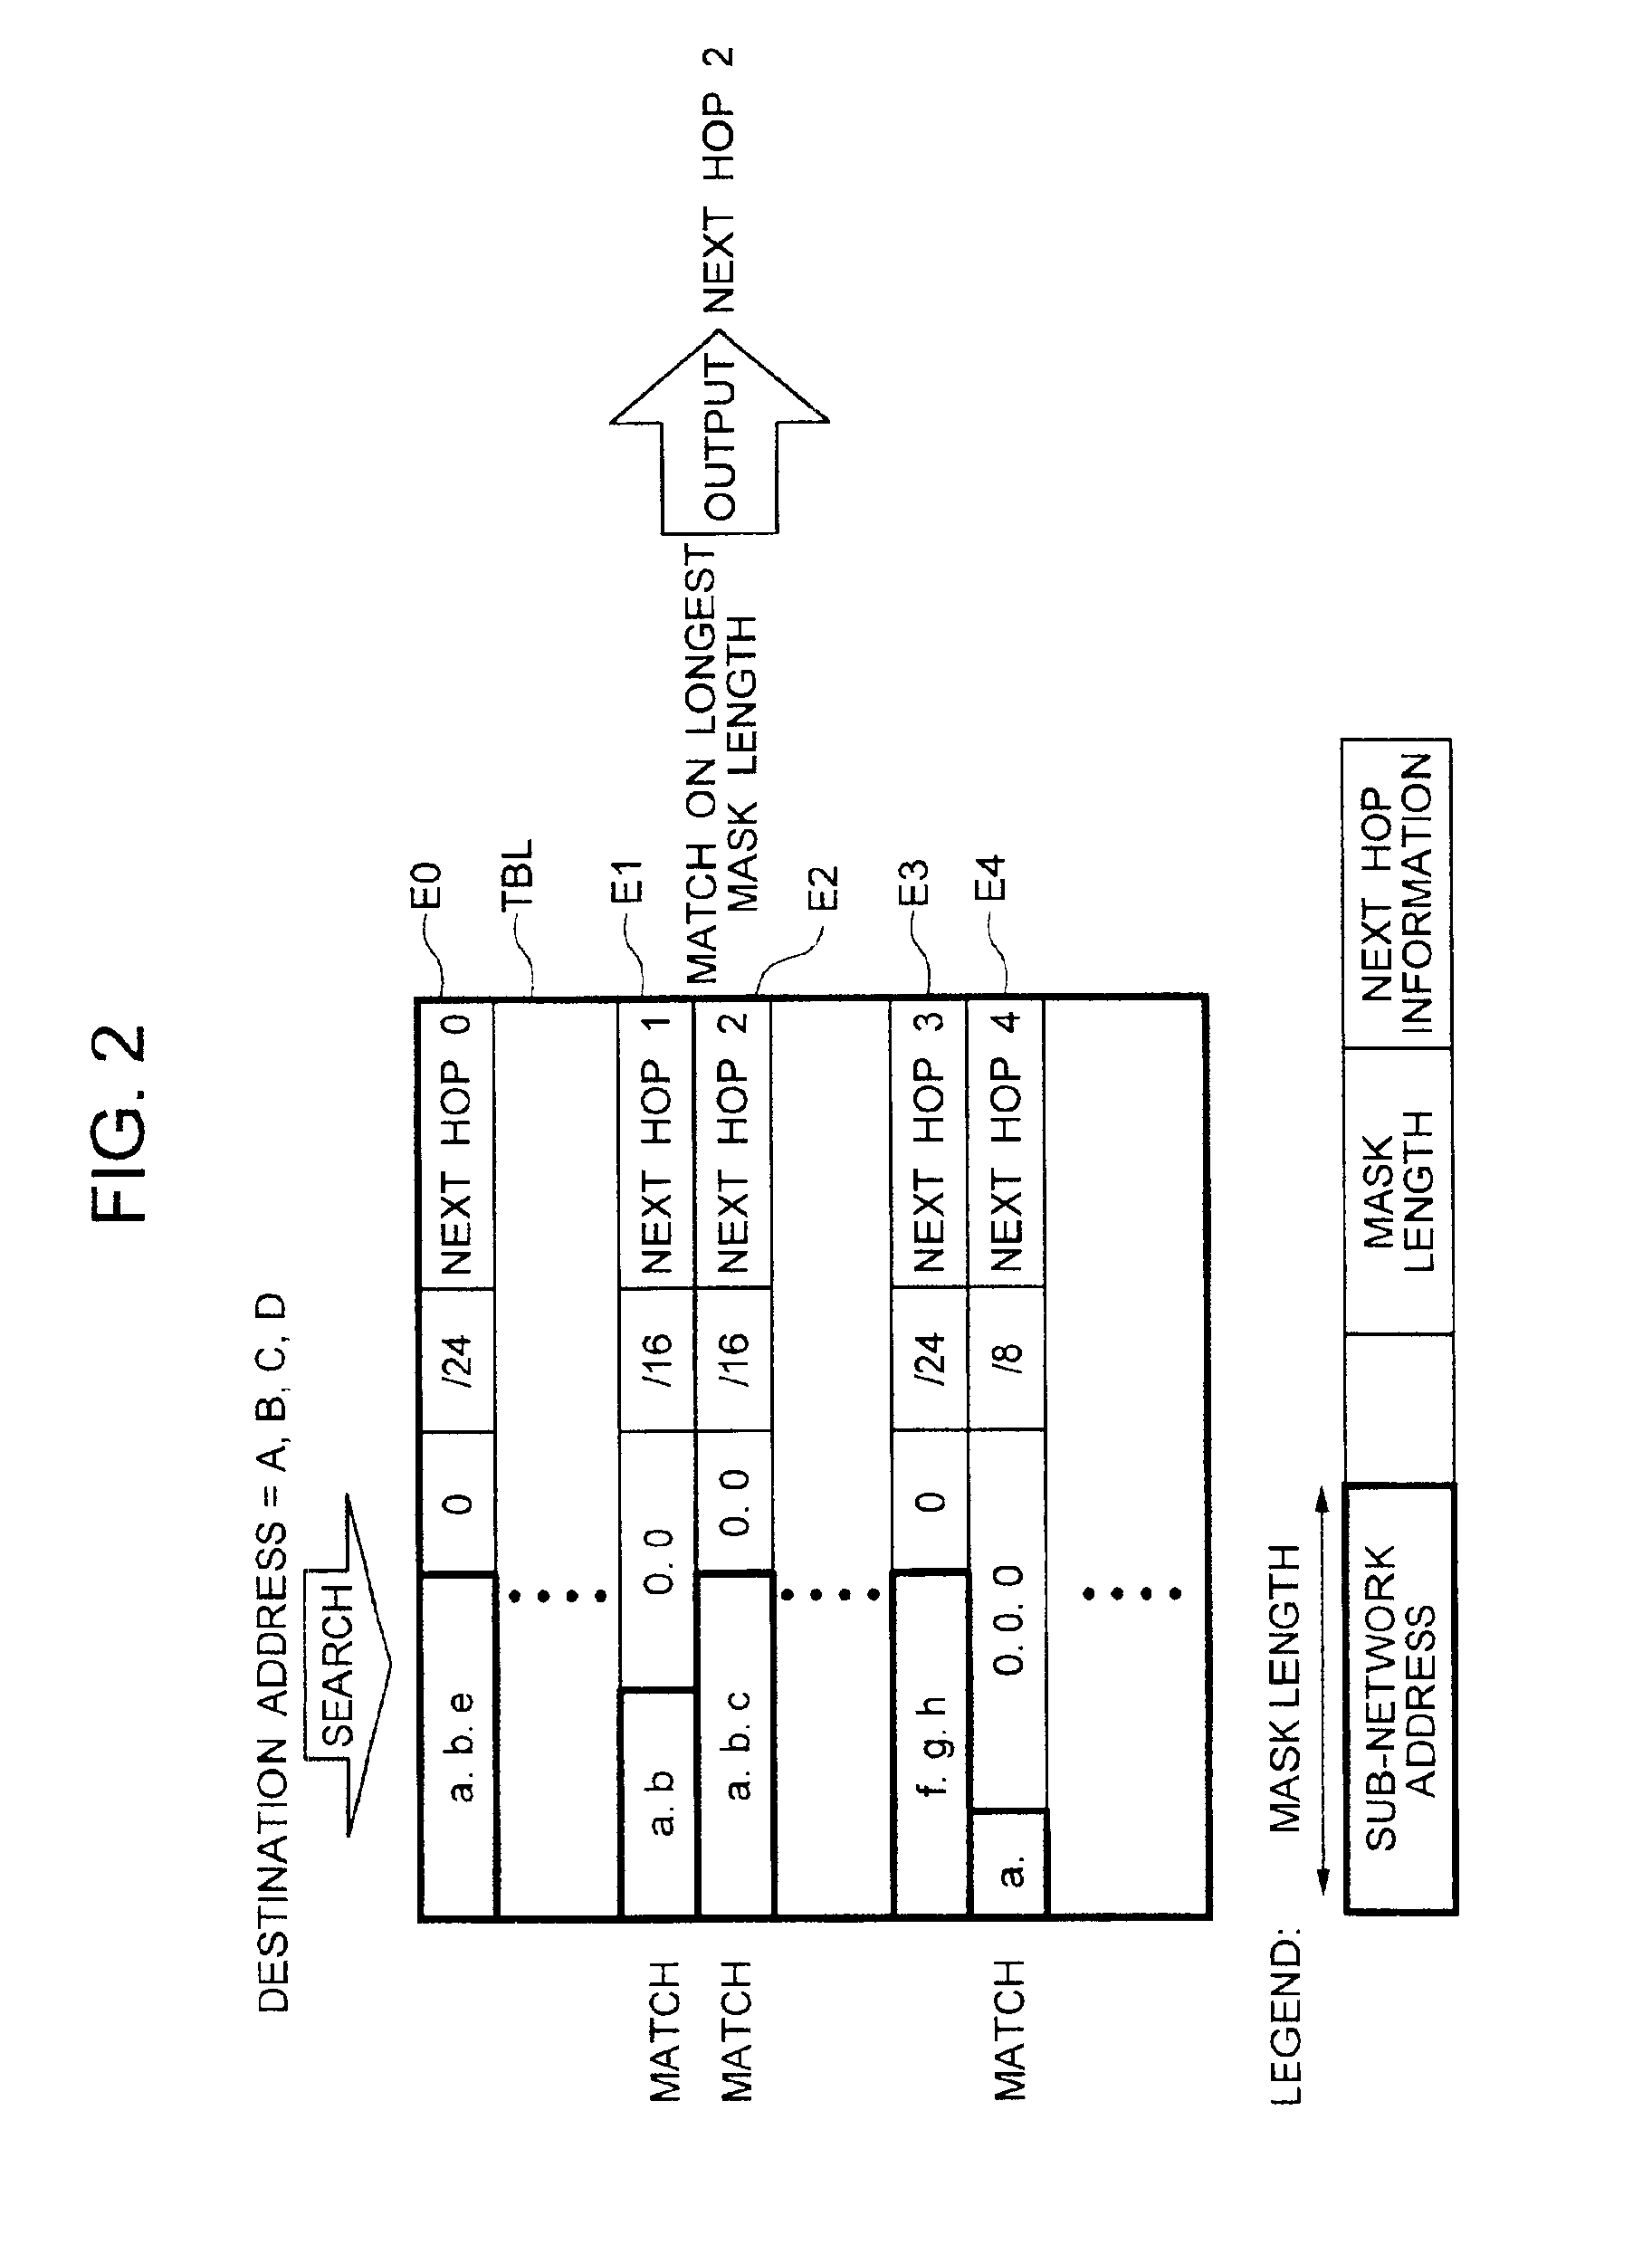 Network repeater and network next transfer desitination searching method